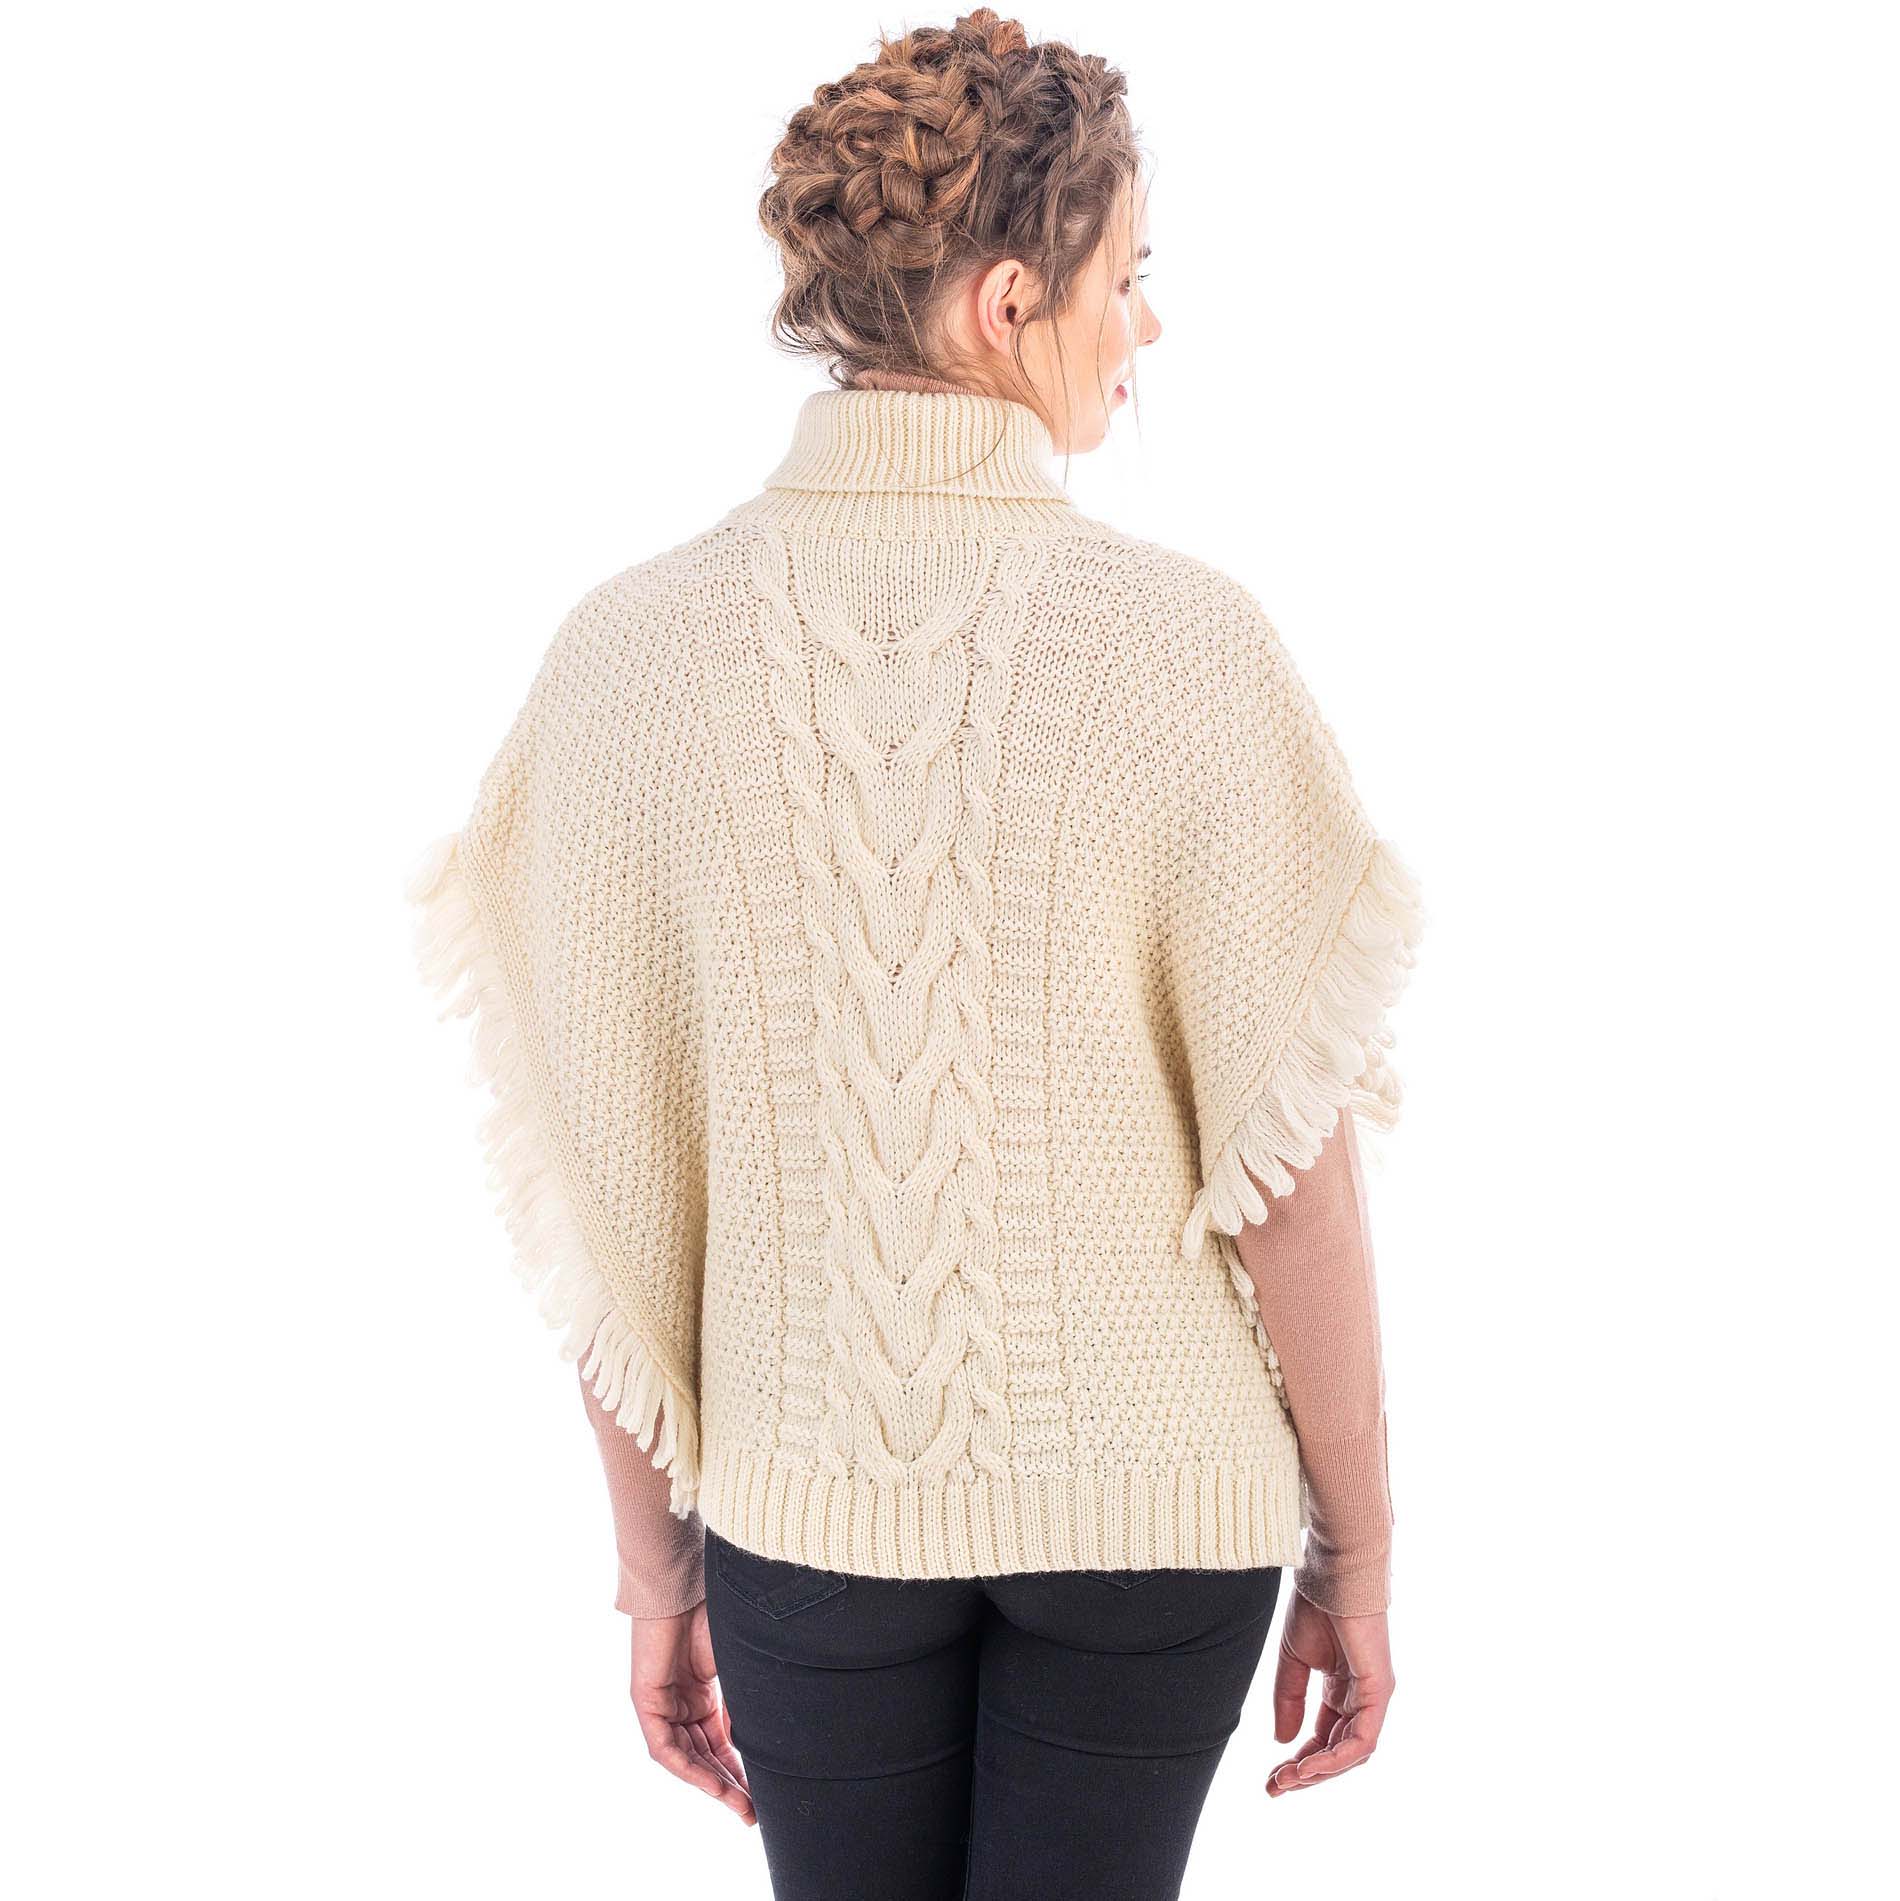 Ladies Cable Knit Cowl Neck Poncho - Aran Sweaters Direct